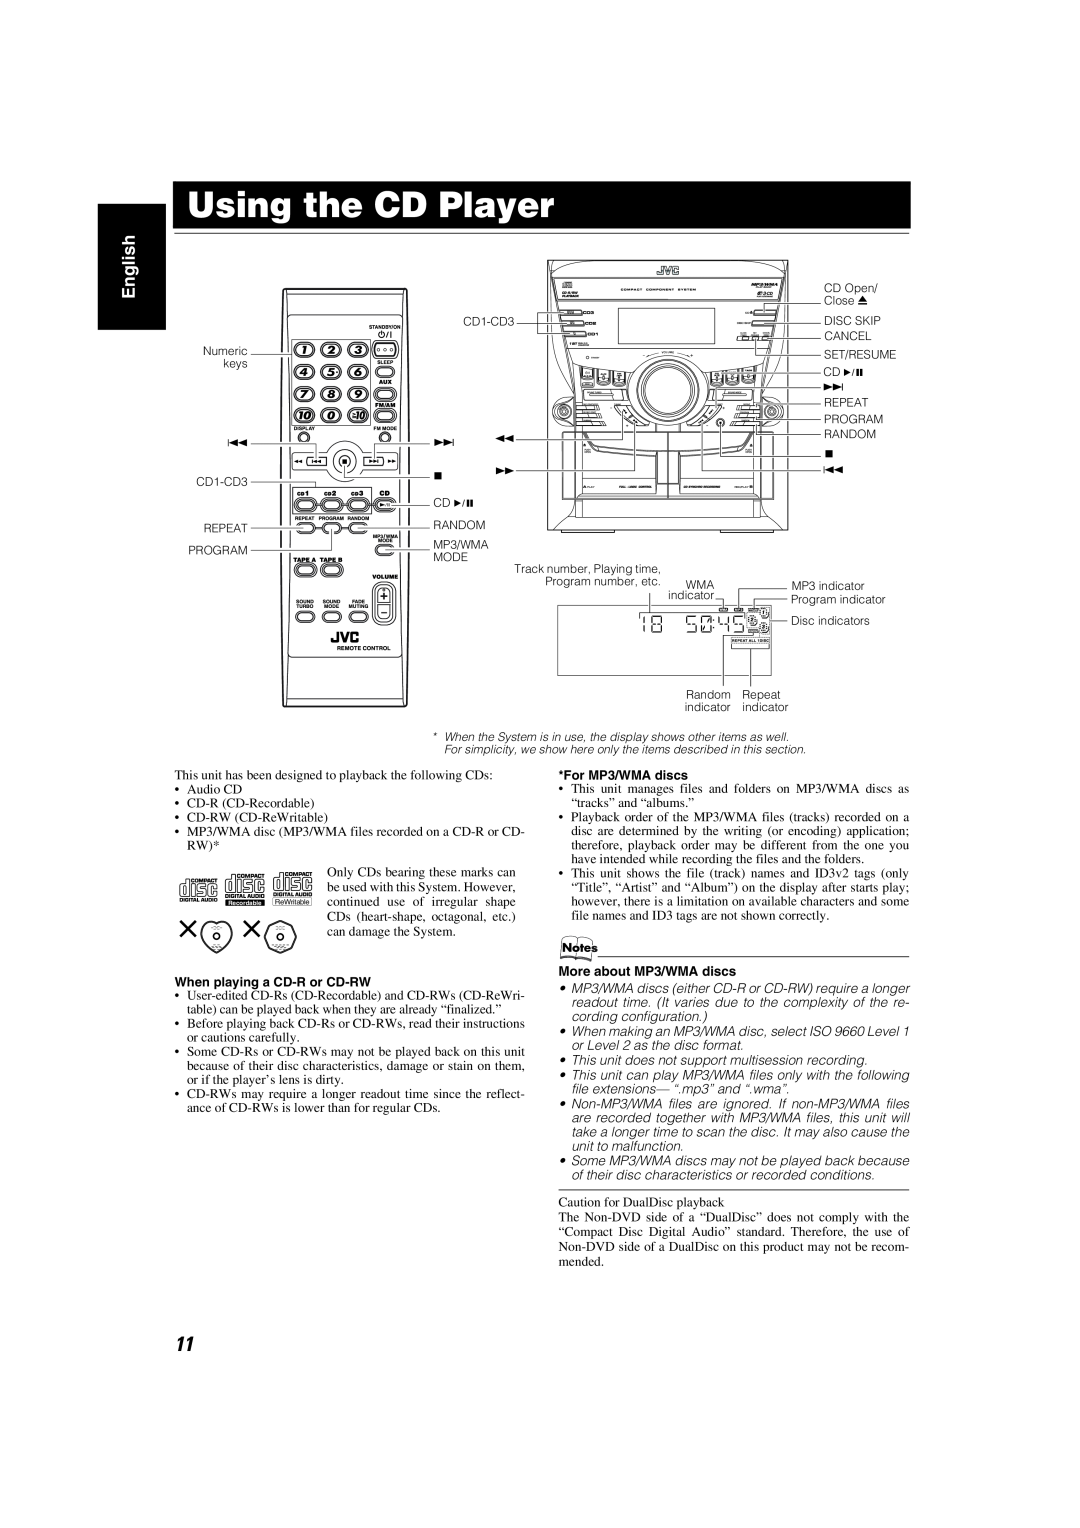 JVC MX-KC45 manual Using the CD Player, English, When playing a CD-Ror CD-RW, For MP3/WMA discs, More about MP3/WMA discs 